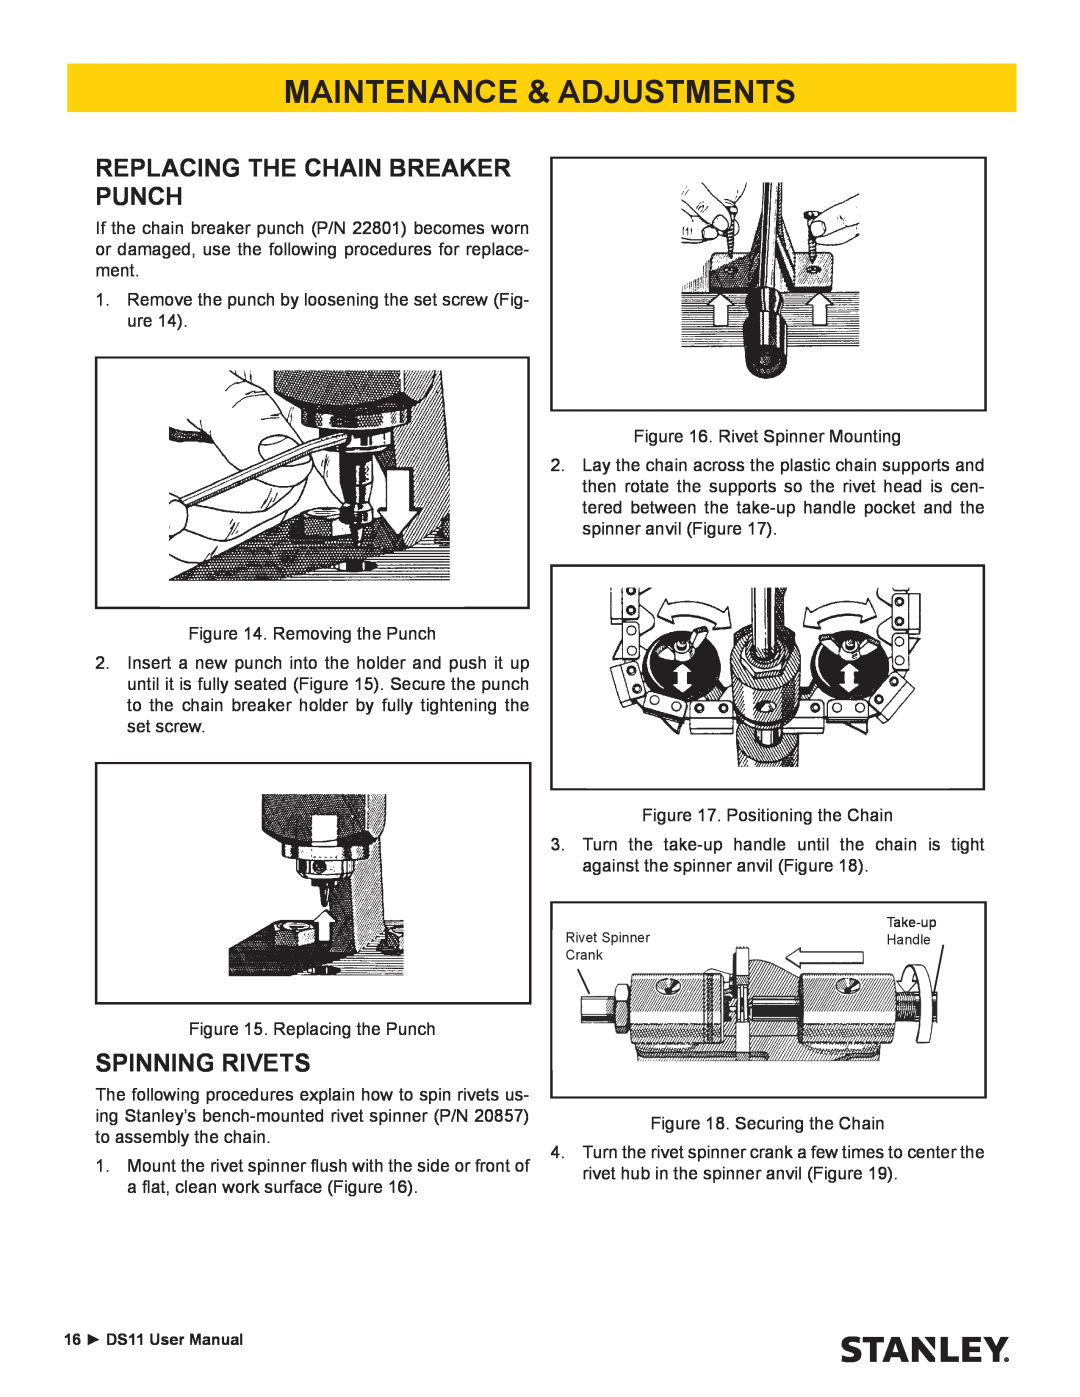 Stanley Black & Decker DS11 user manual Replacing The Chain Breaker Punch, Spinning Rivets, Maintenance & Adjustments 